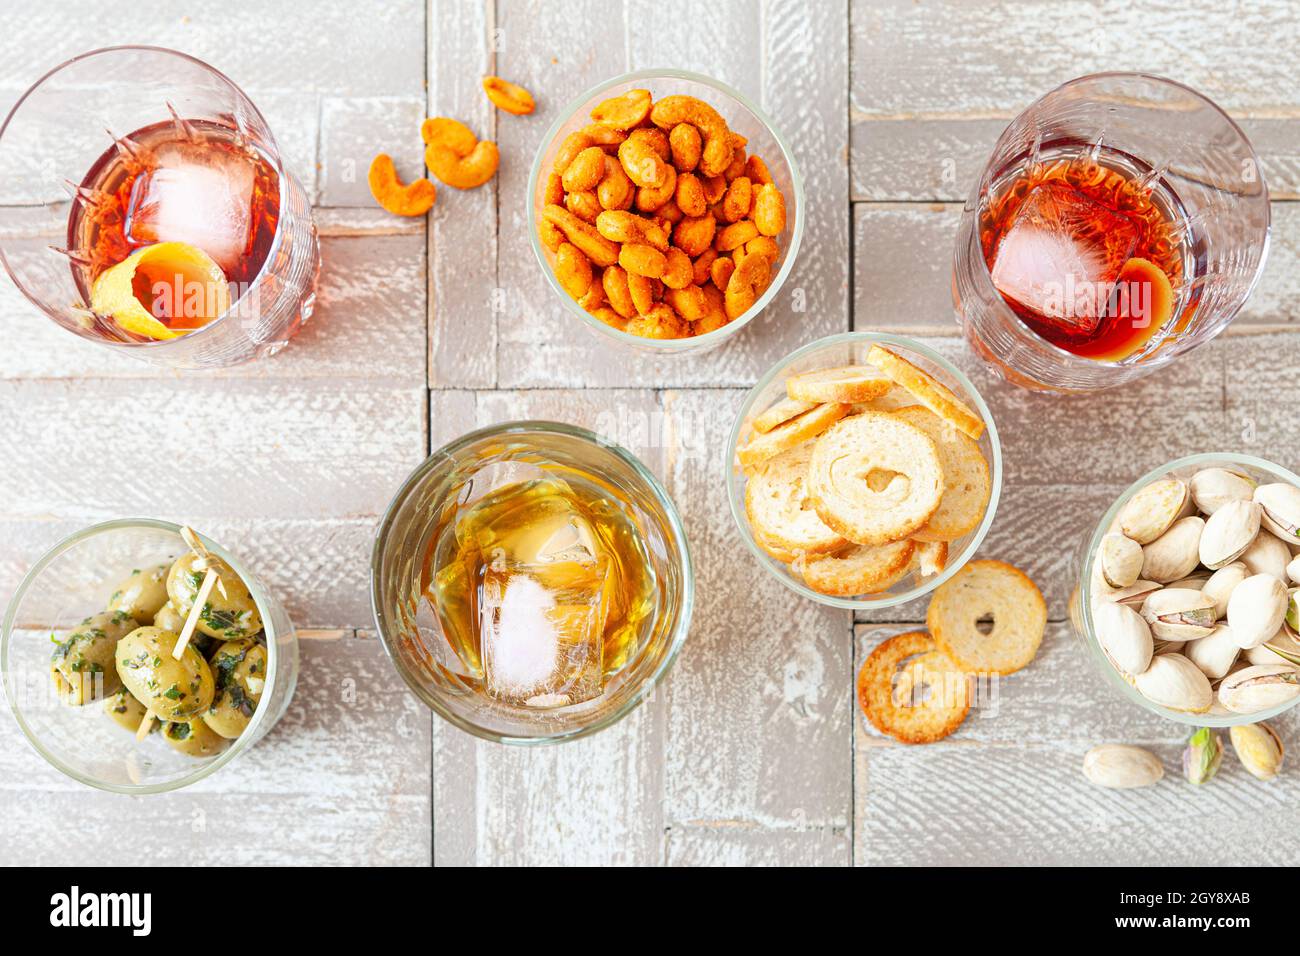 Alcoholic drinks, cocktails on ice and salty snack, appetizers Stock Photo